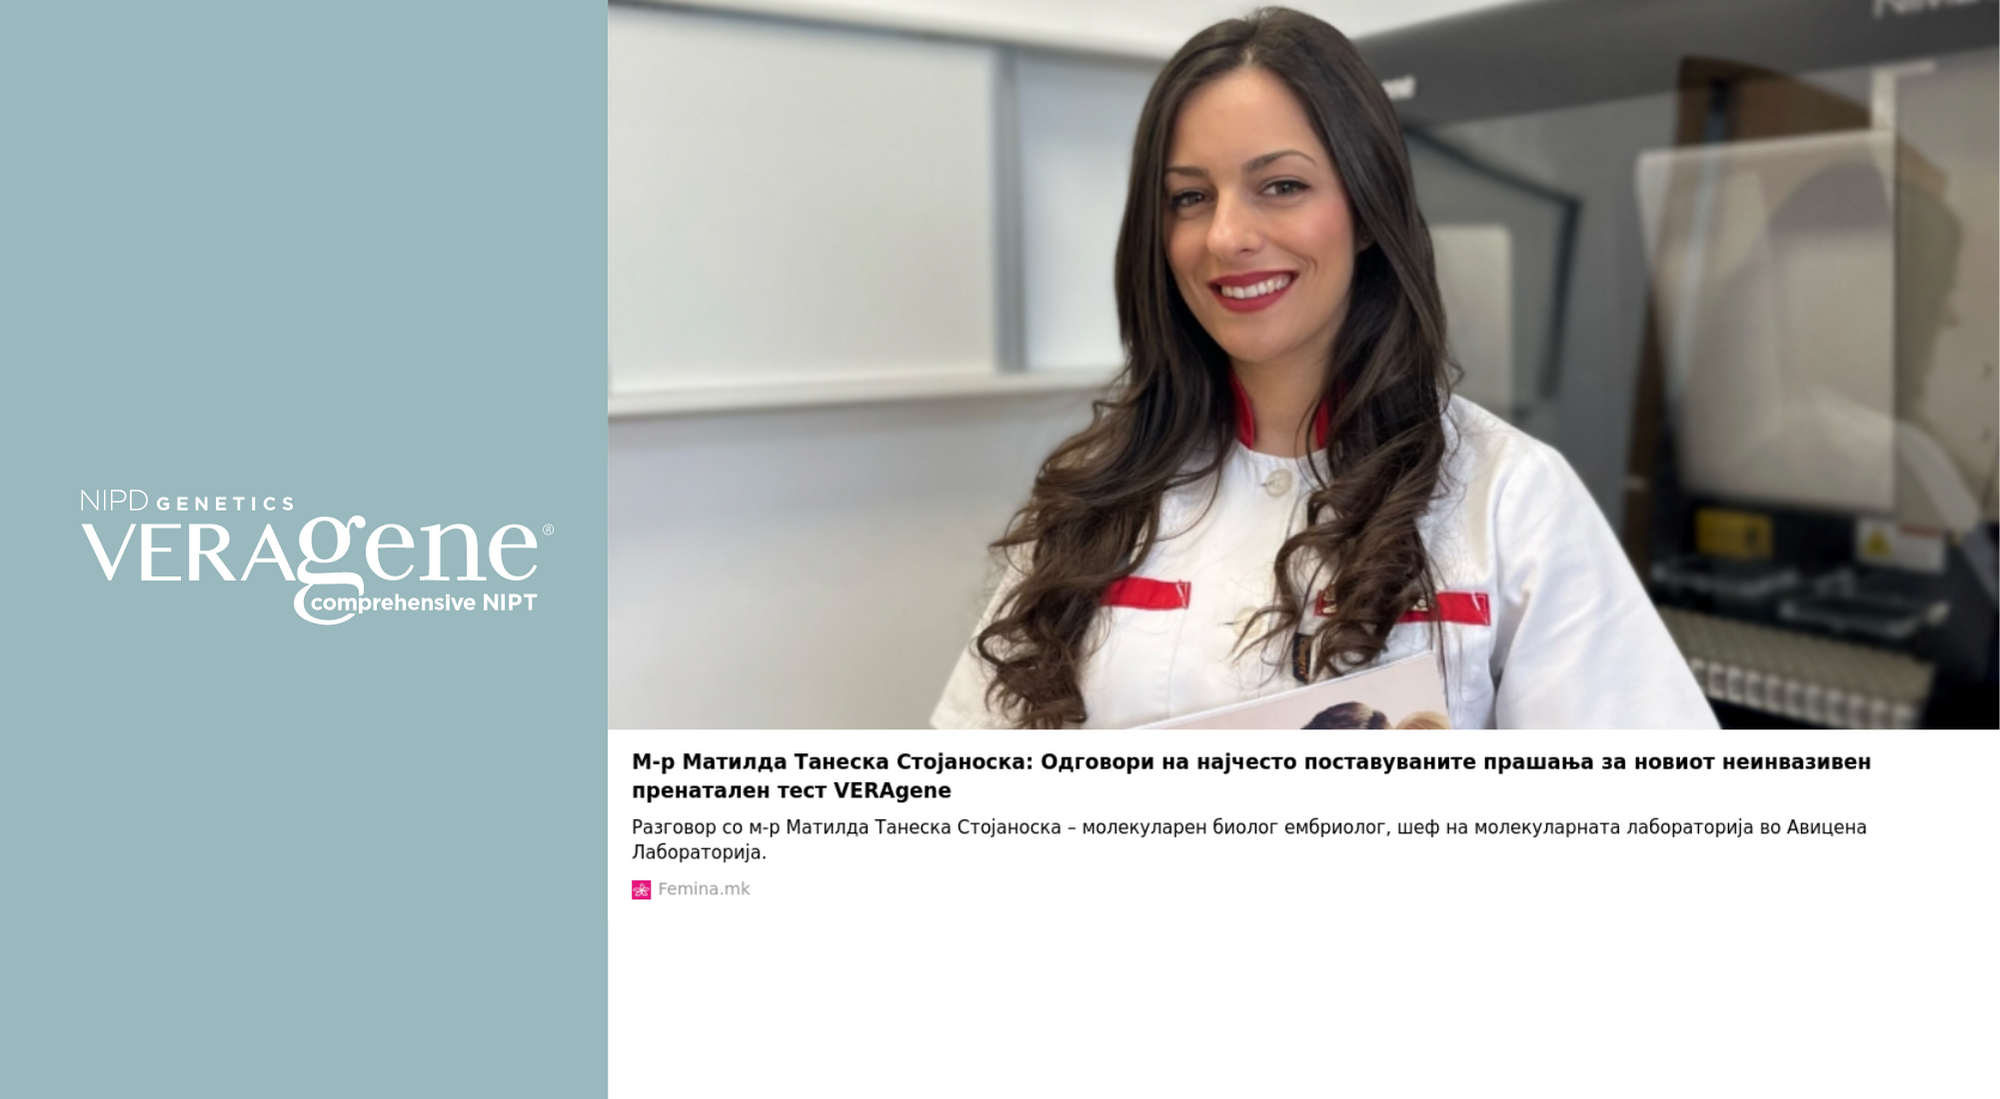 Matilda Taneska Stojanoska: Answers to the most frequently asked questions about the new non-invasive prenatal test VERAgene